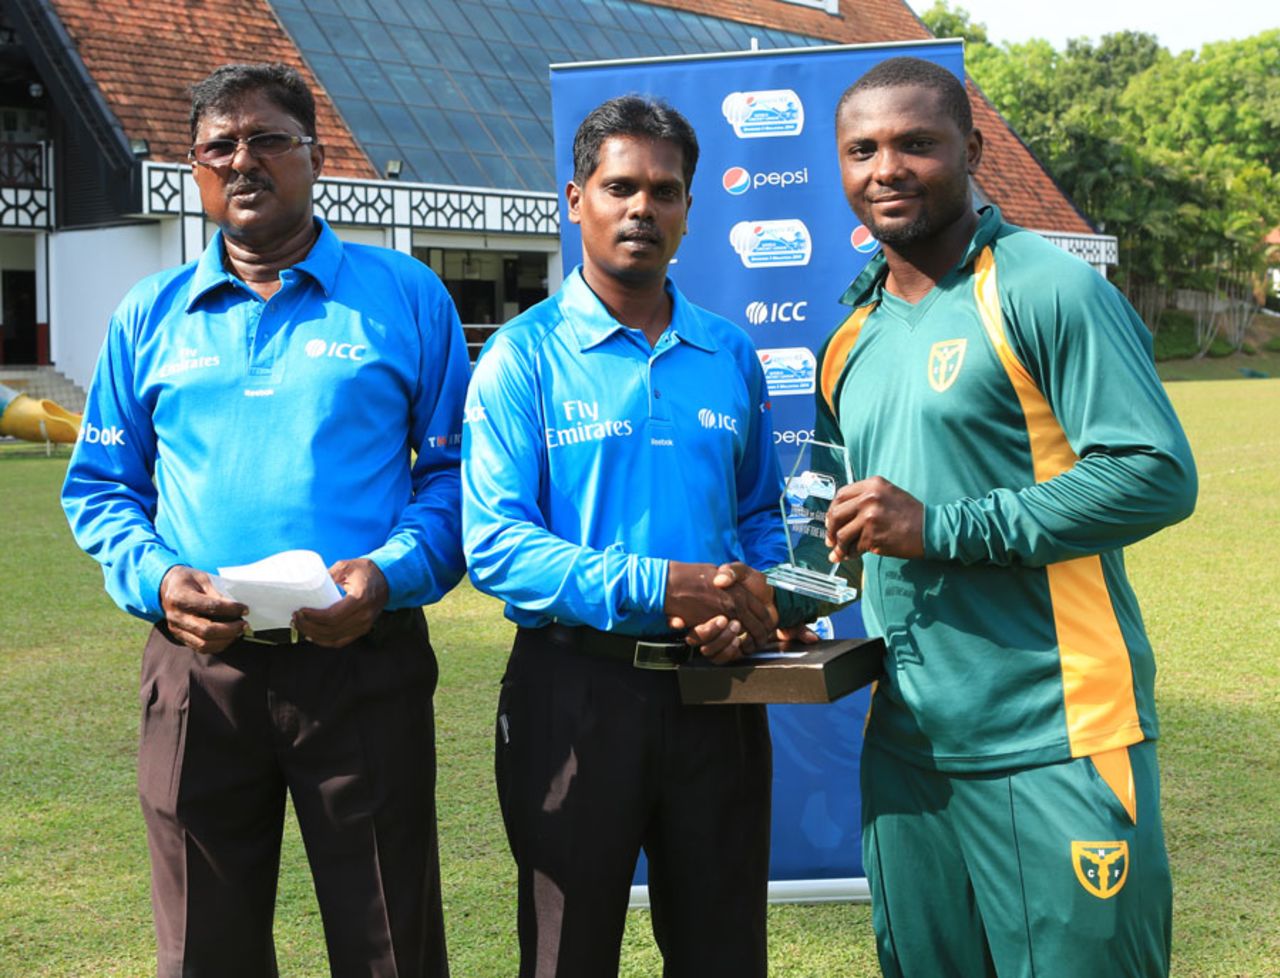 Endurance Ofem receives the Man-of-the-Match award, Nigeria v Guernsey, ICC World Cricket League Division Five, Kuala Lumpur, March 7, 2014